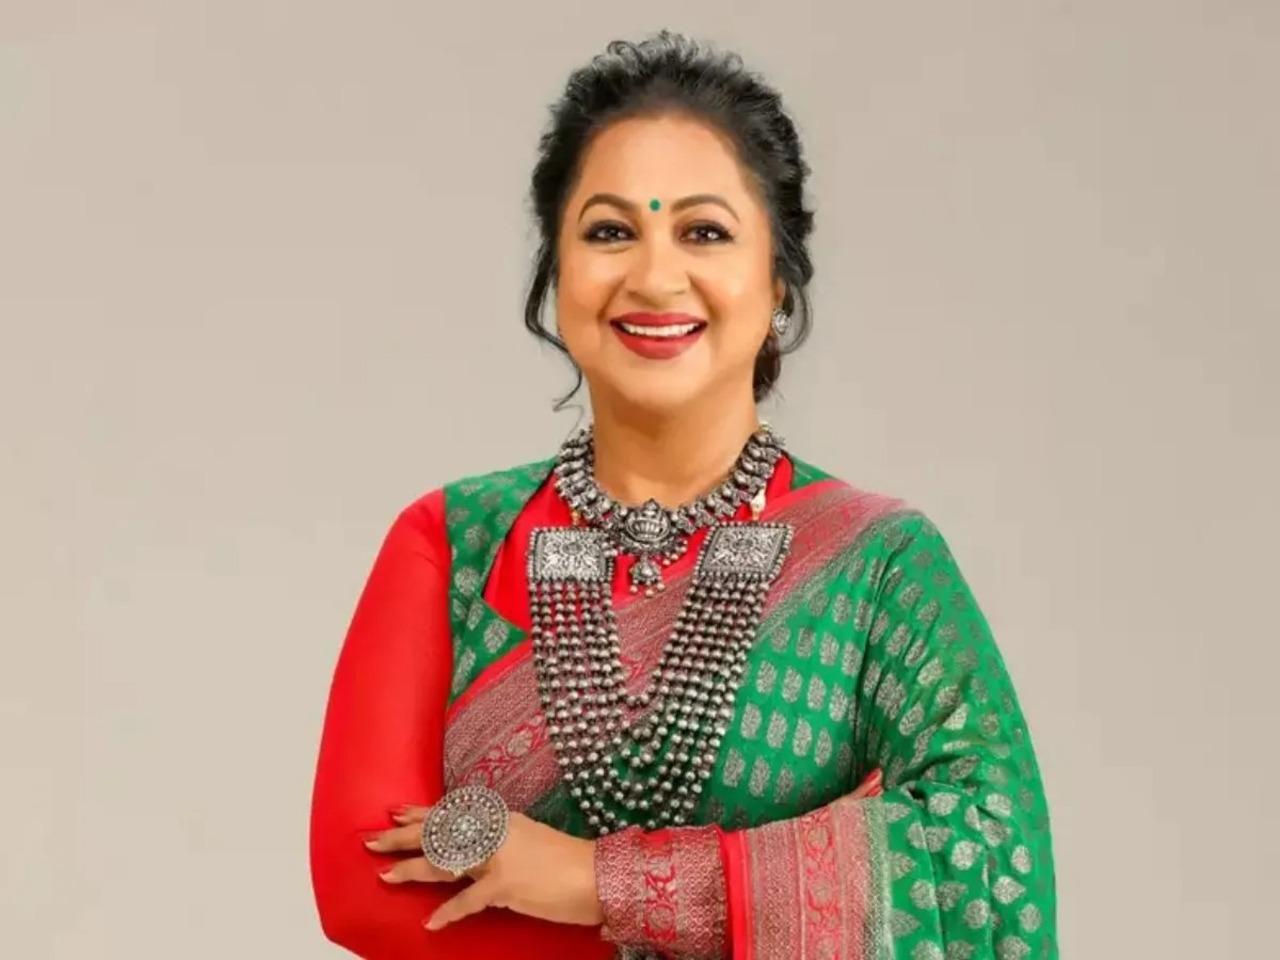 Radhika Sarathkumar, popular actor-turned politician, is fighting on a BJP ticket from Virudhunagar in Tamil Nadu. The BJP candidate and wife of popular actor Sarathkumar recently merged their party All Indian Samathva Makkal Katchi (AISMK) with the BJP 